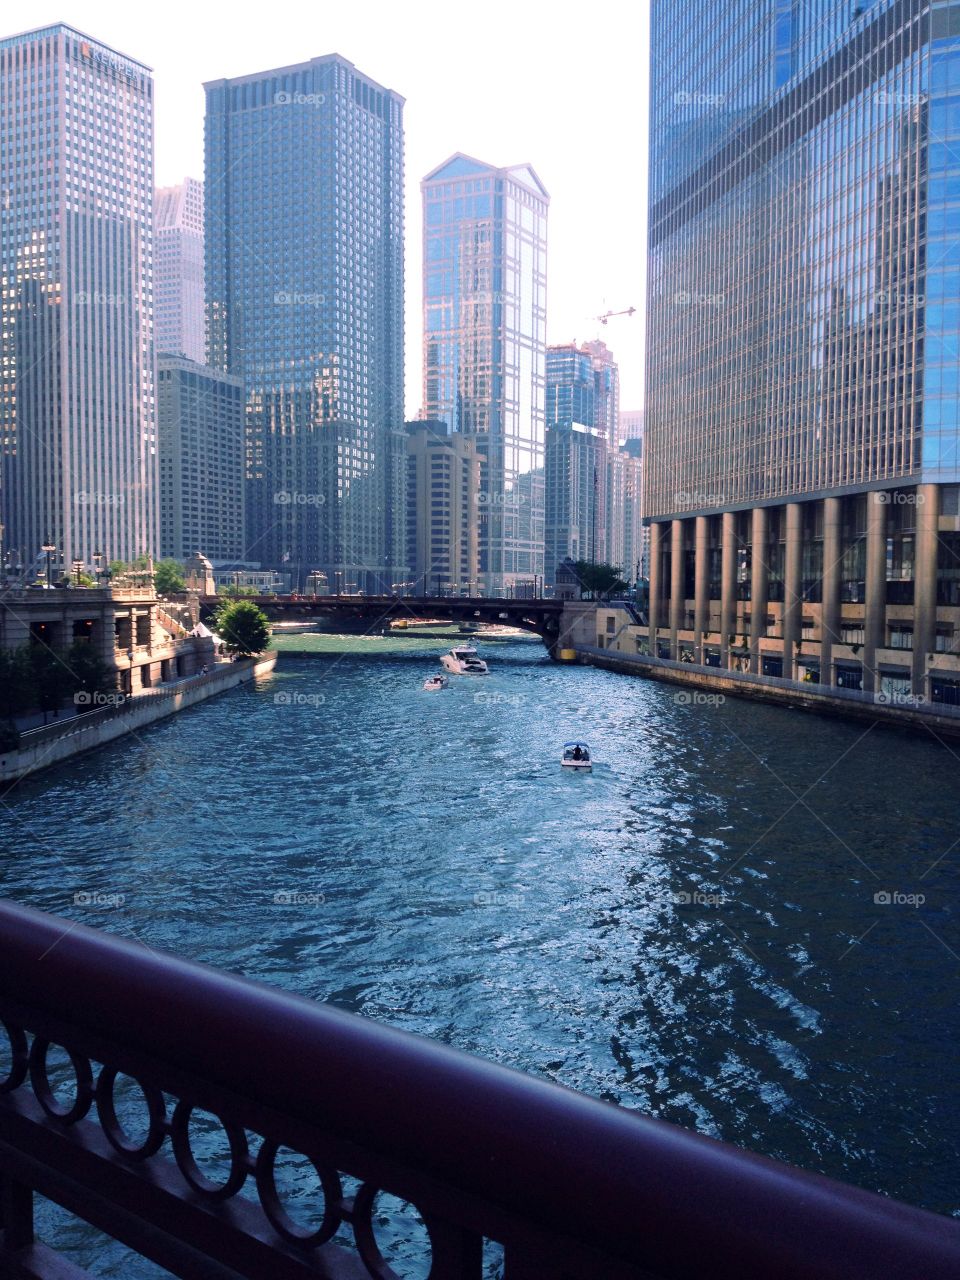 Chicago River. Taken in downtown Chicago while passing over the Chicago River. 